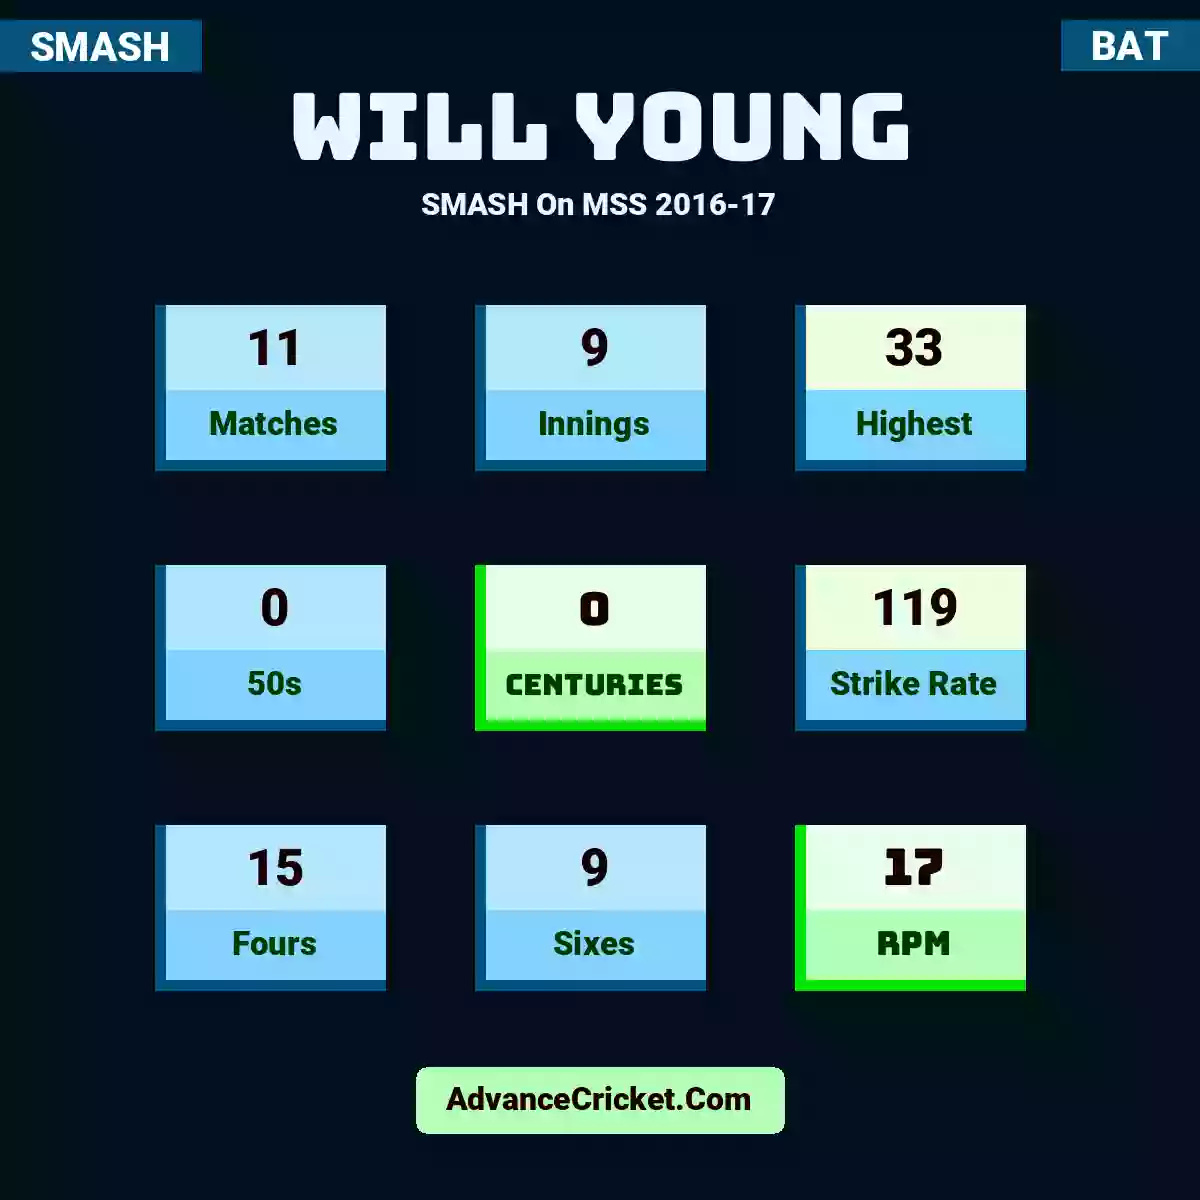 Will Young SMASH  On MSS 2016-17, Will Young played 11 matches, scored 33 runs as highest, 0 half-centuries, and 0 centuries, with a strike rate of 119. W.Young hit 15 fours and 9 sixes, with an RPM of 17.